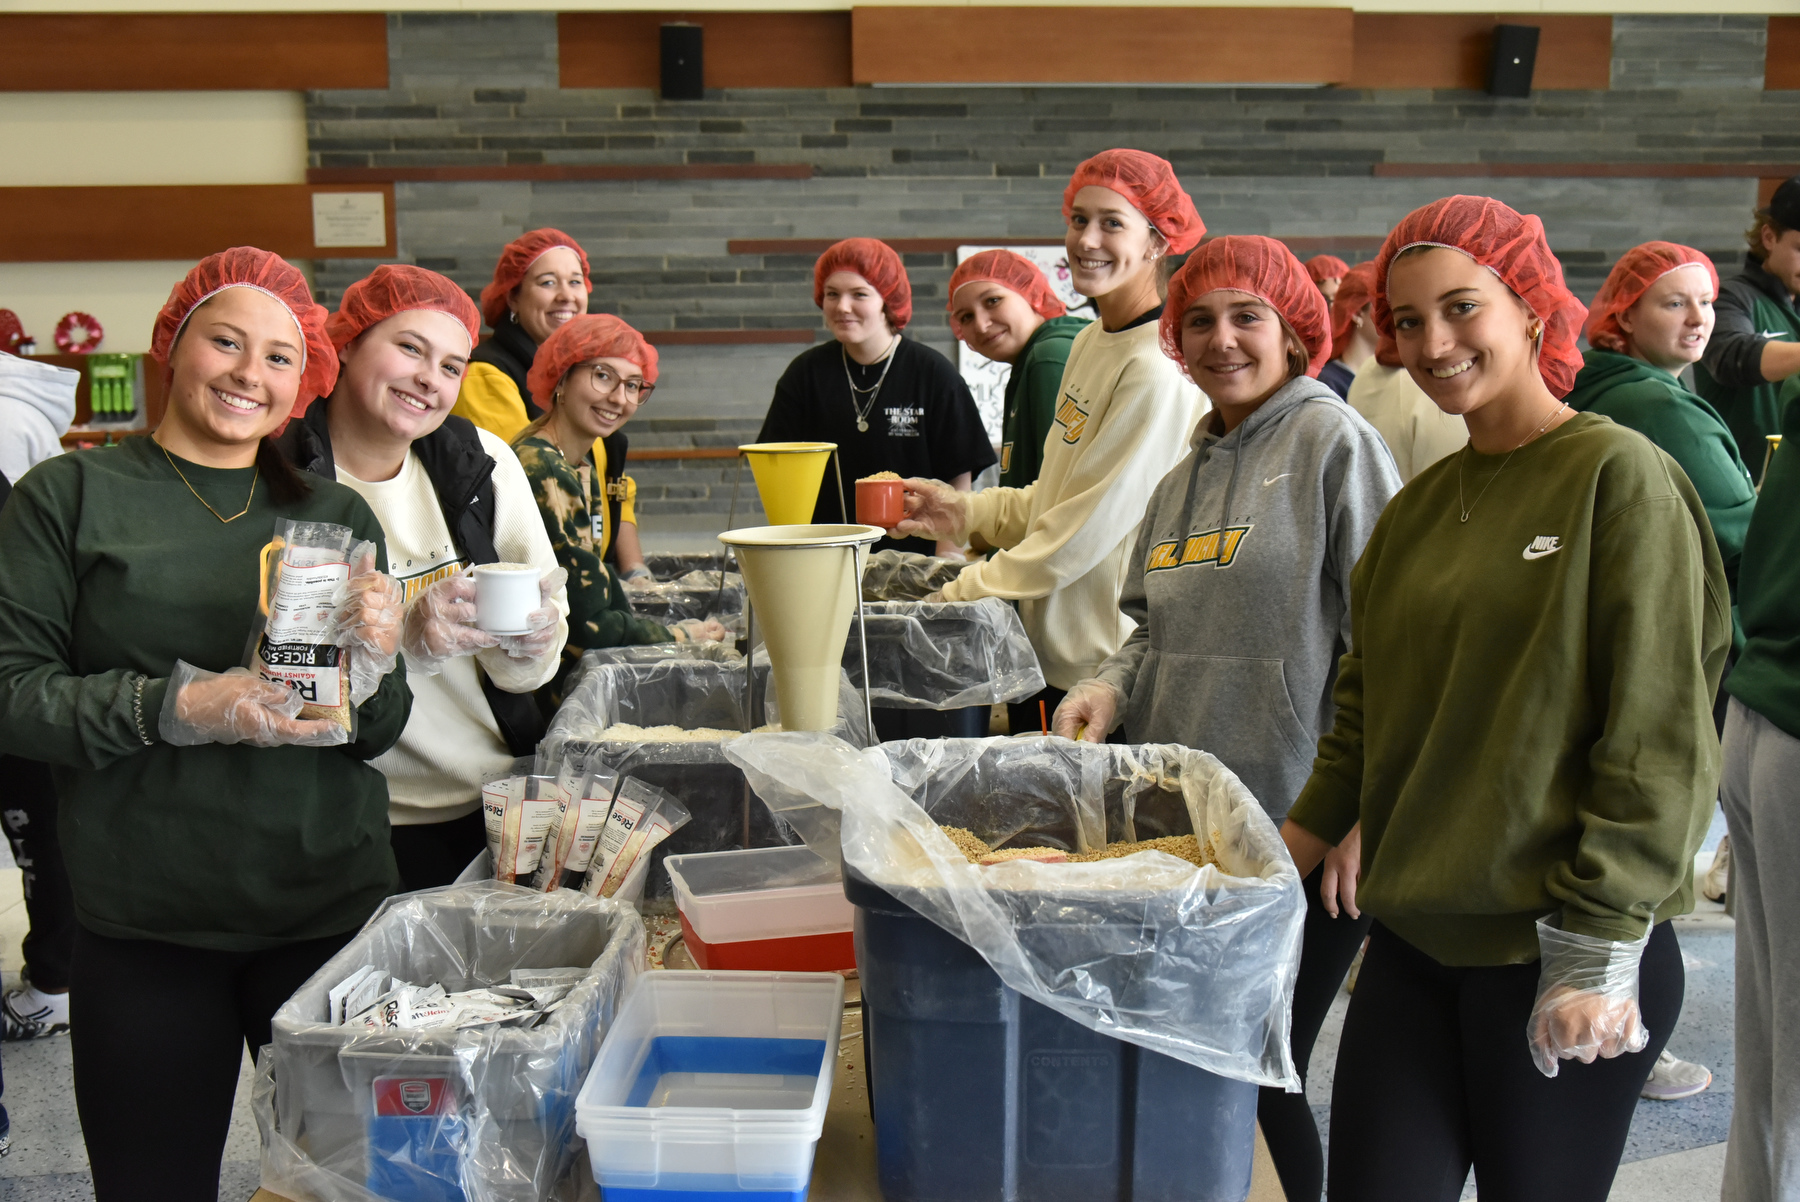 The second annual Martin Luther King, Jr. MLK Day of Service in partnership with Rise Against Hunger was held Feb. 3 in the Marano Campus Center food and activity court.